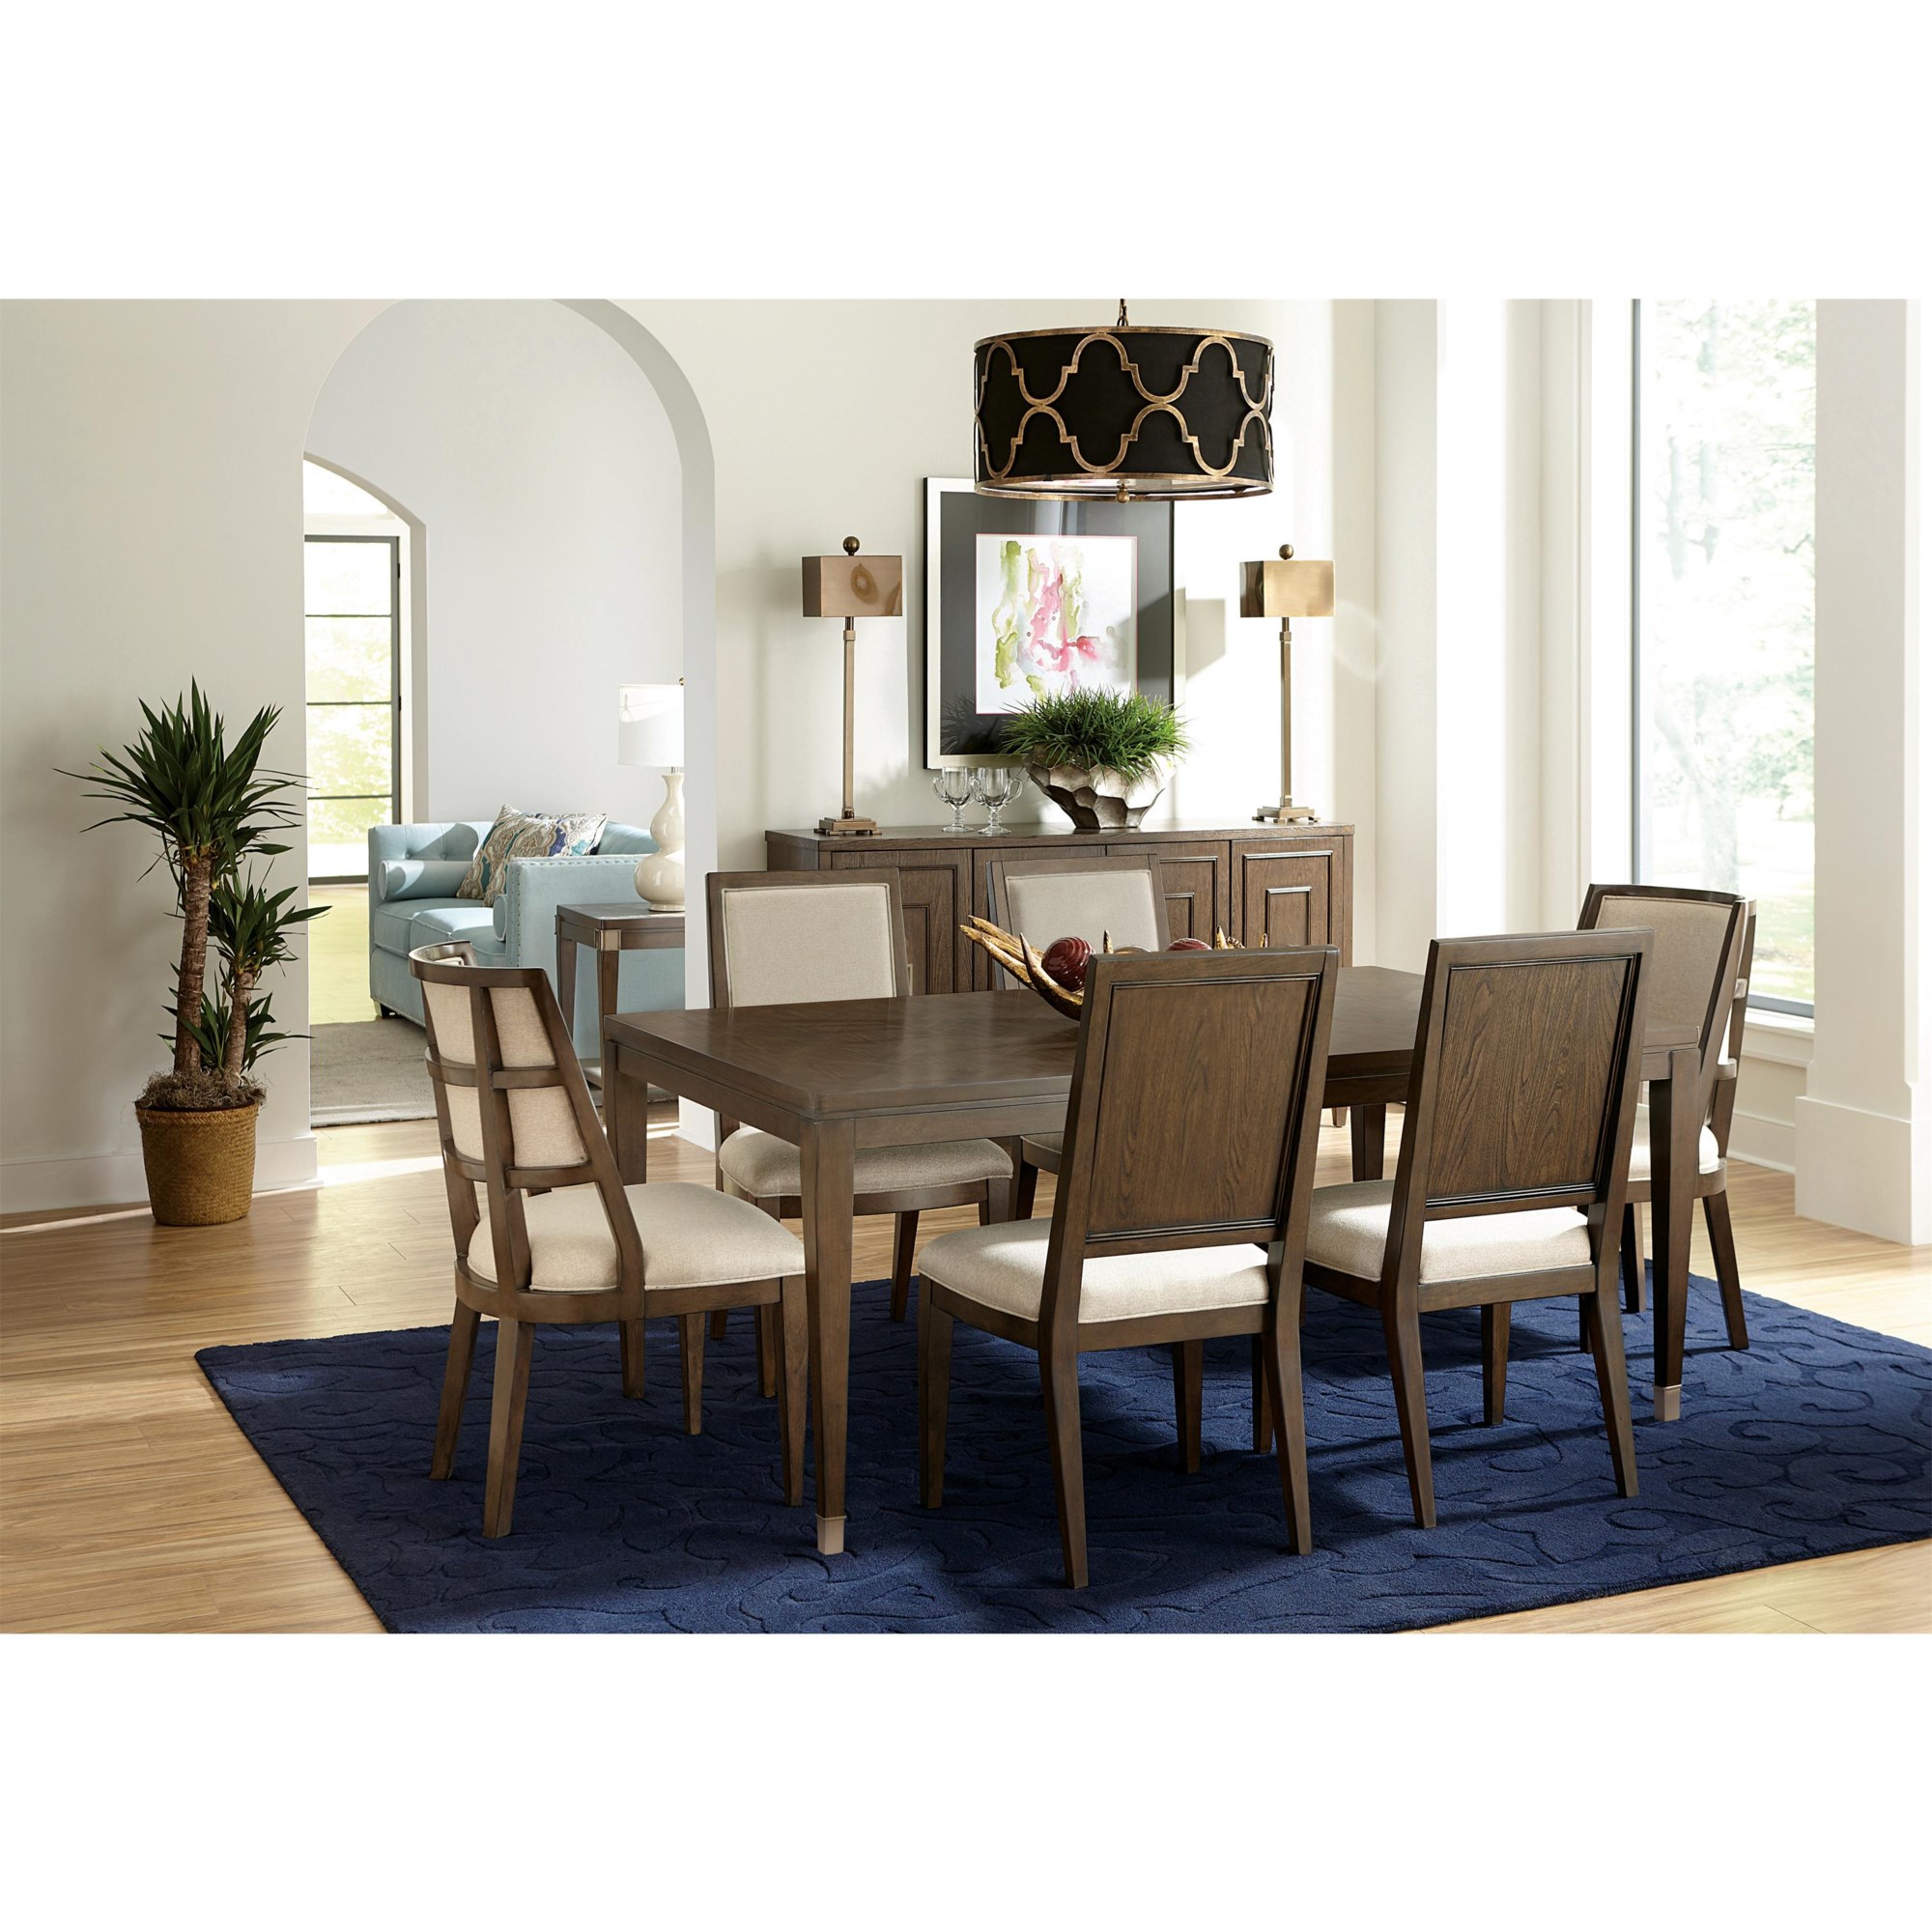 Dining Chairs  Ontario Straight-Backed Wood Kitchen Chairs